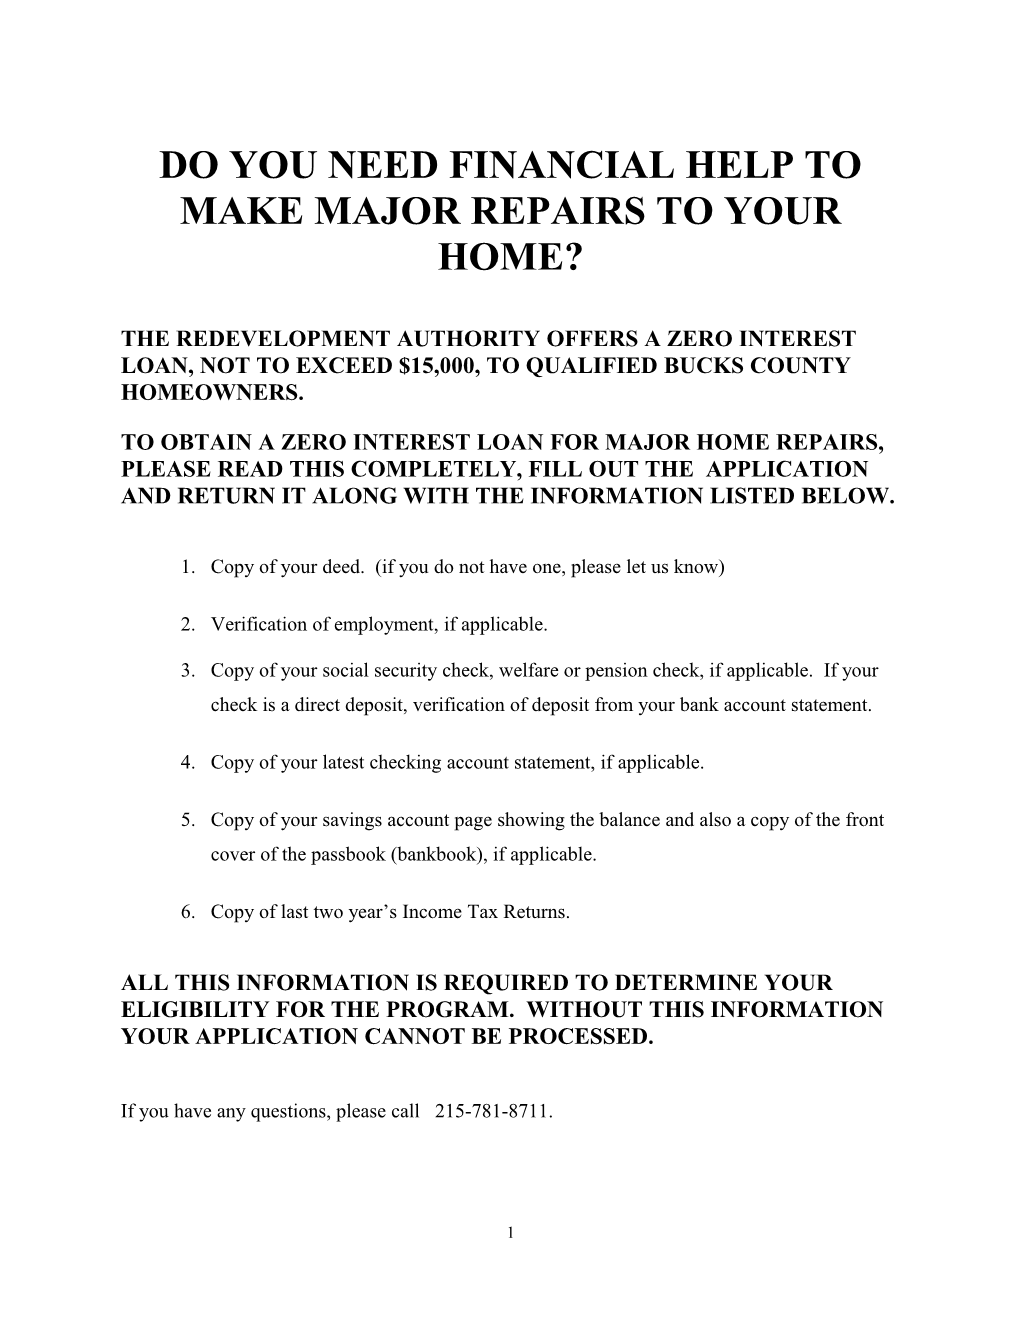 Doyou Need Financial Help to Make Major Repairs to Your Home?